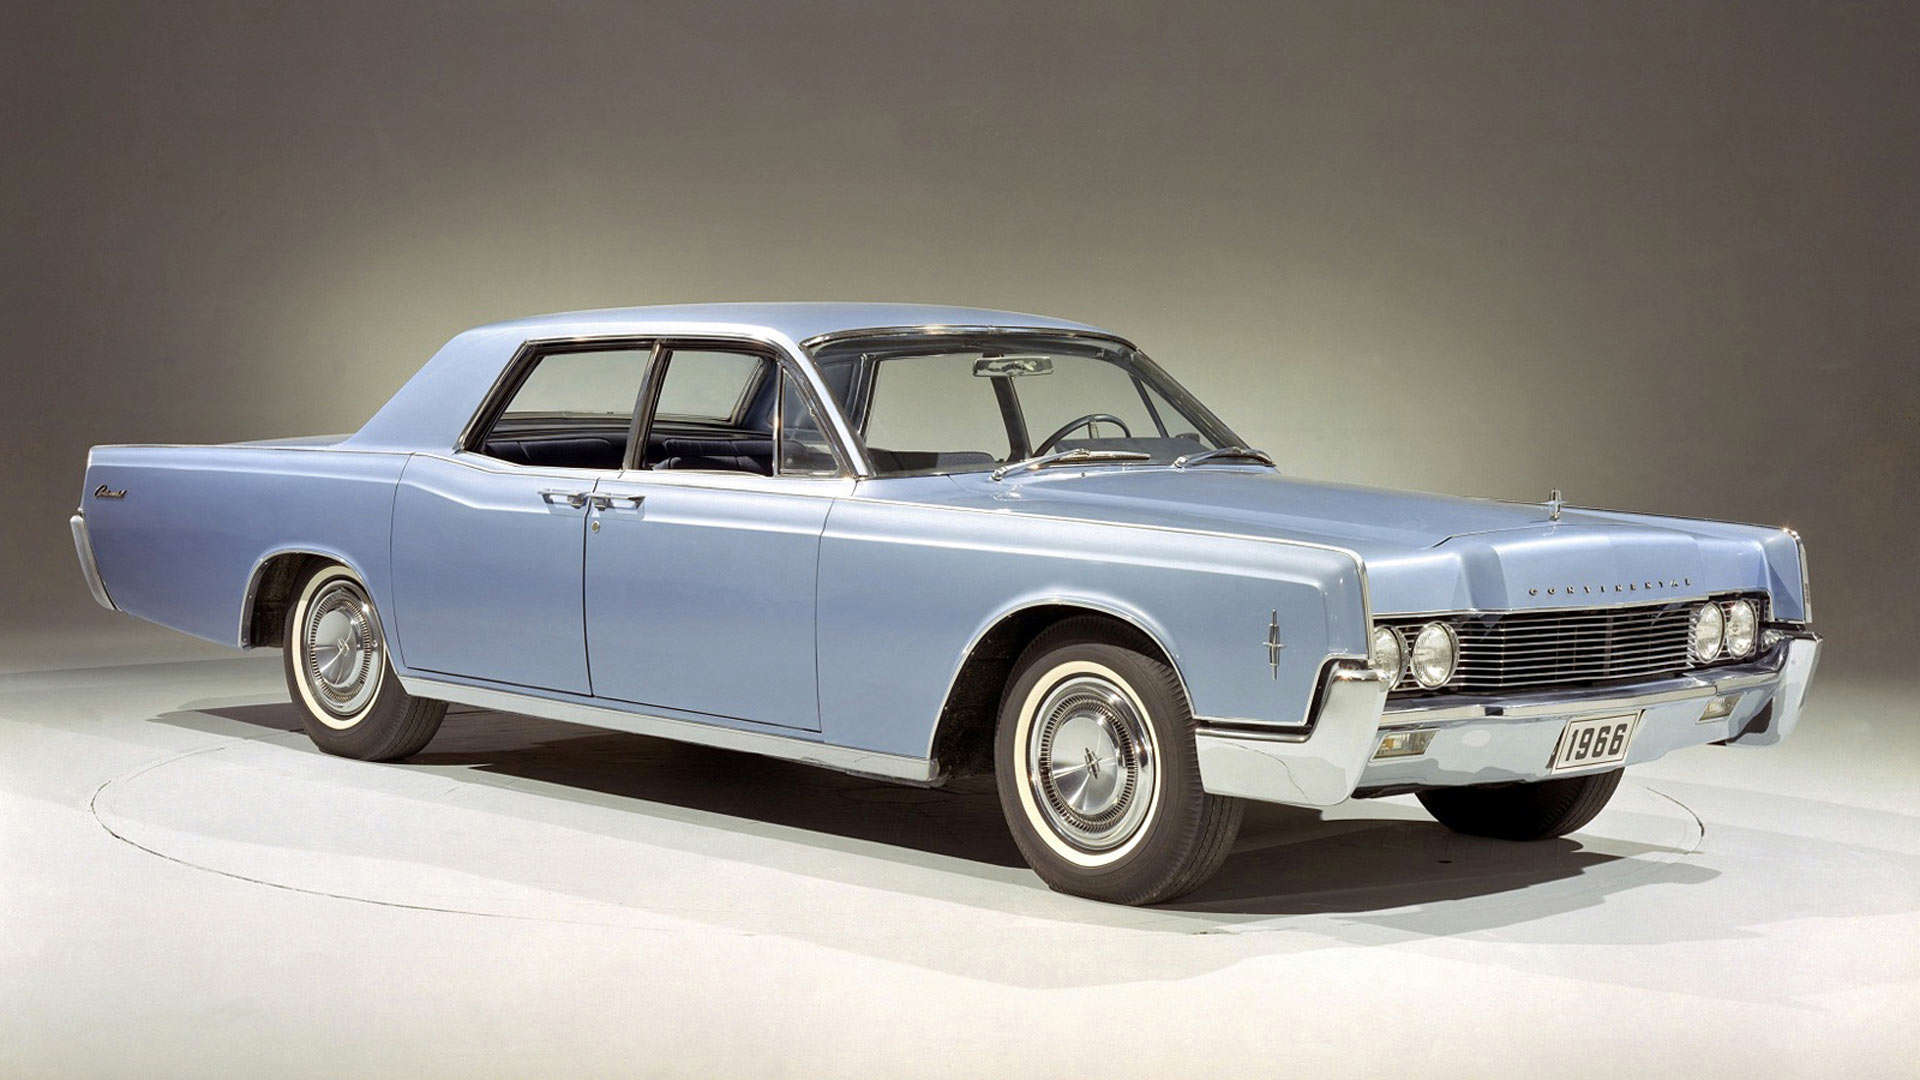 Slide 24 of 33: The fourth-generation Continental, featuring rear-hinged passenger doors, is perhaps the most recognisable version of the big Lincoln. But by 1966, with the Continental expanding rapidly in size, power also needed to be increased. The answer was a 462-cubic inch V8 variant of the Ford MEL engine. This was tuned to deliver big torque at low revs, to shift the giant Lincoln. It would only remain in use until the end of the 1969 model year.